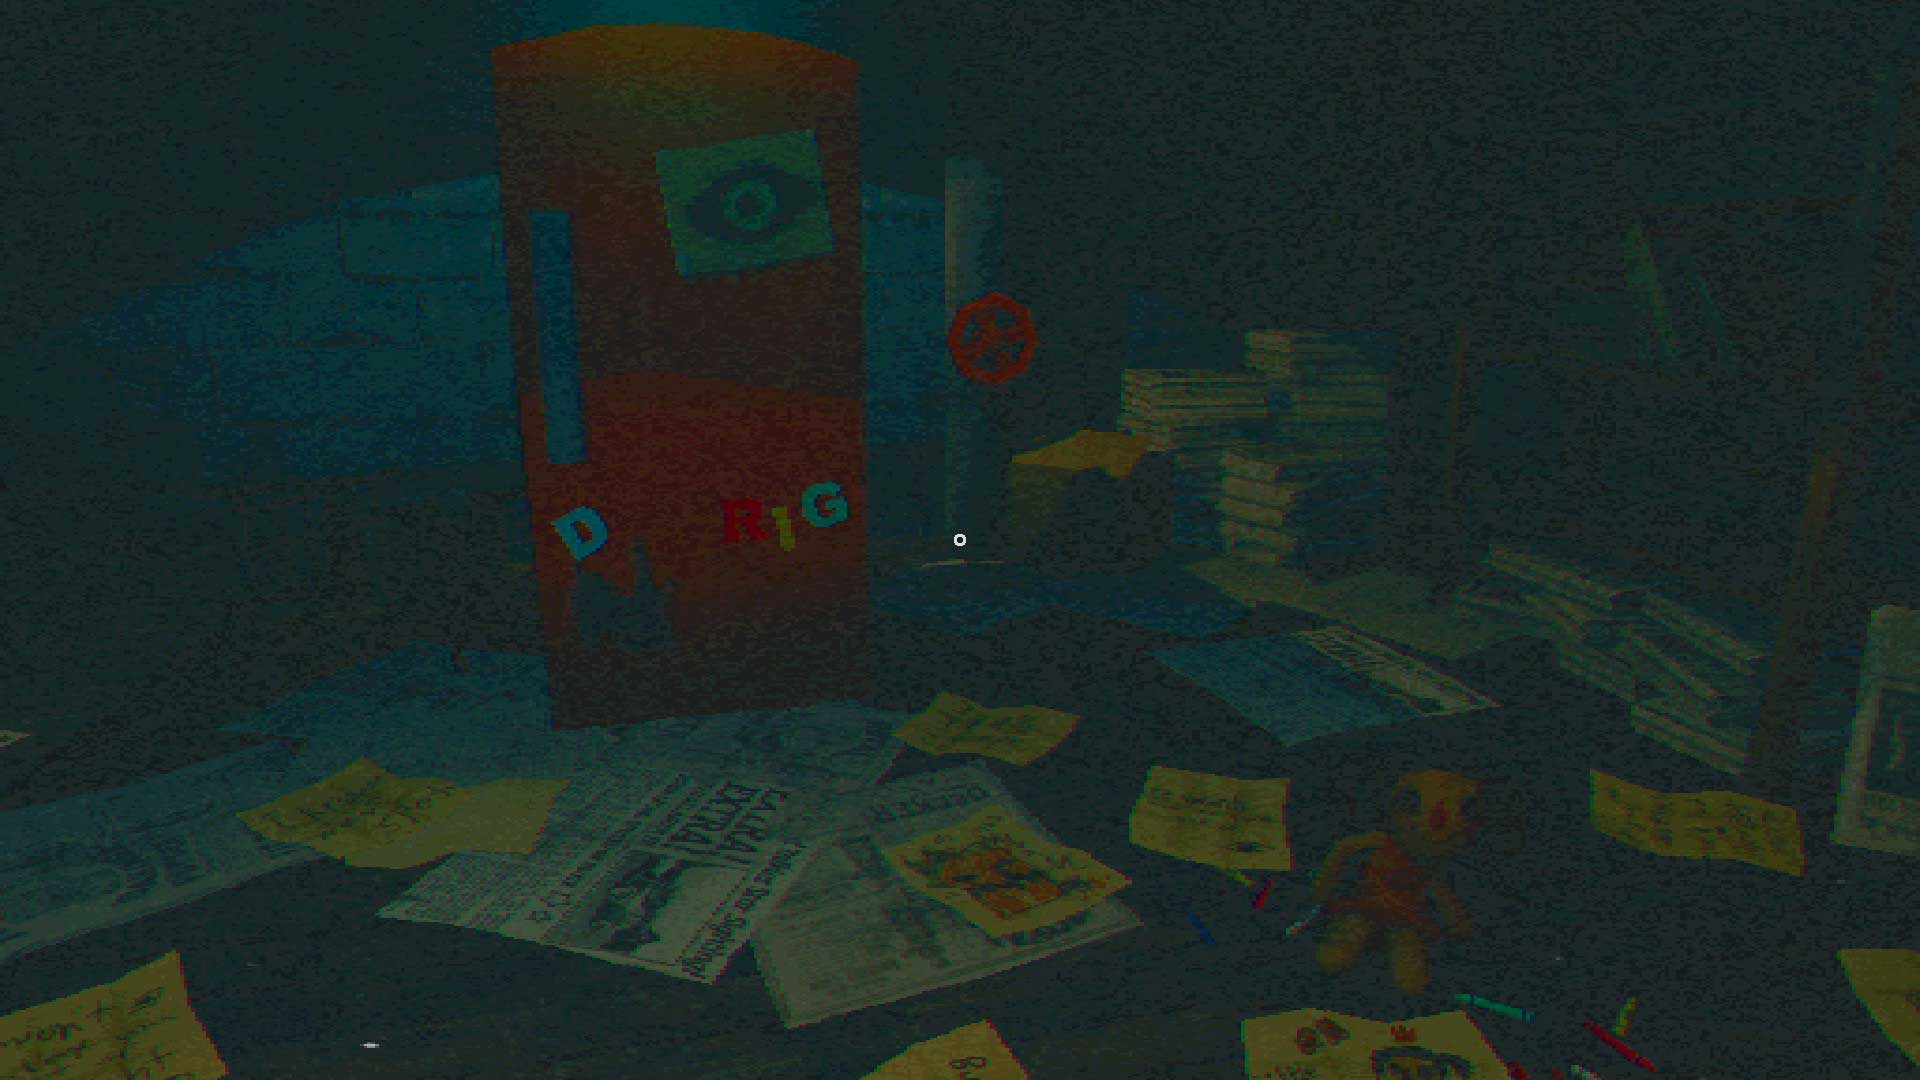 The Fridge is Red is a horror anthology game with a trippy demo